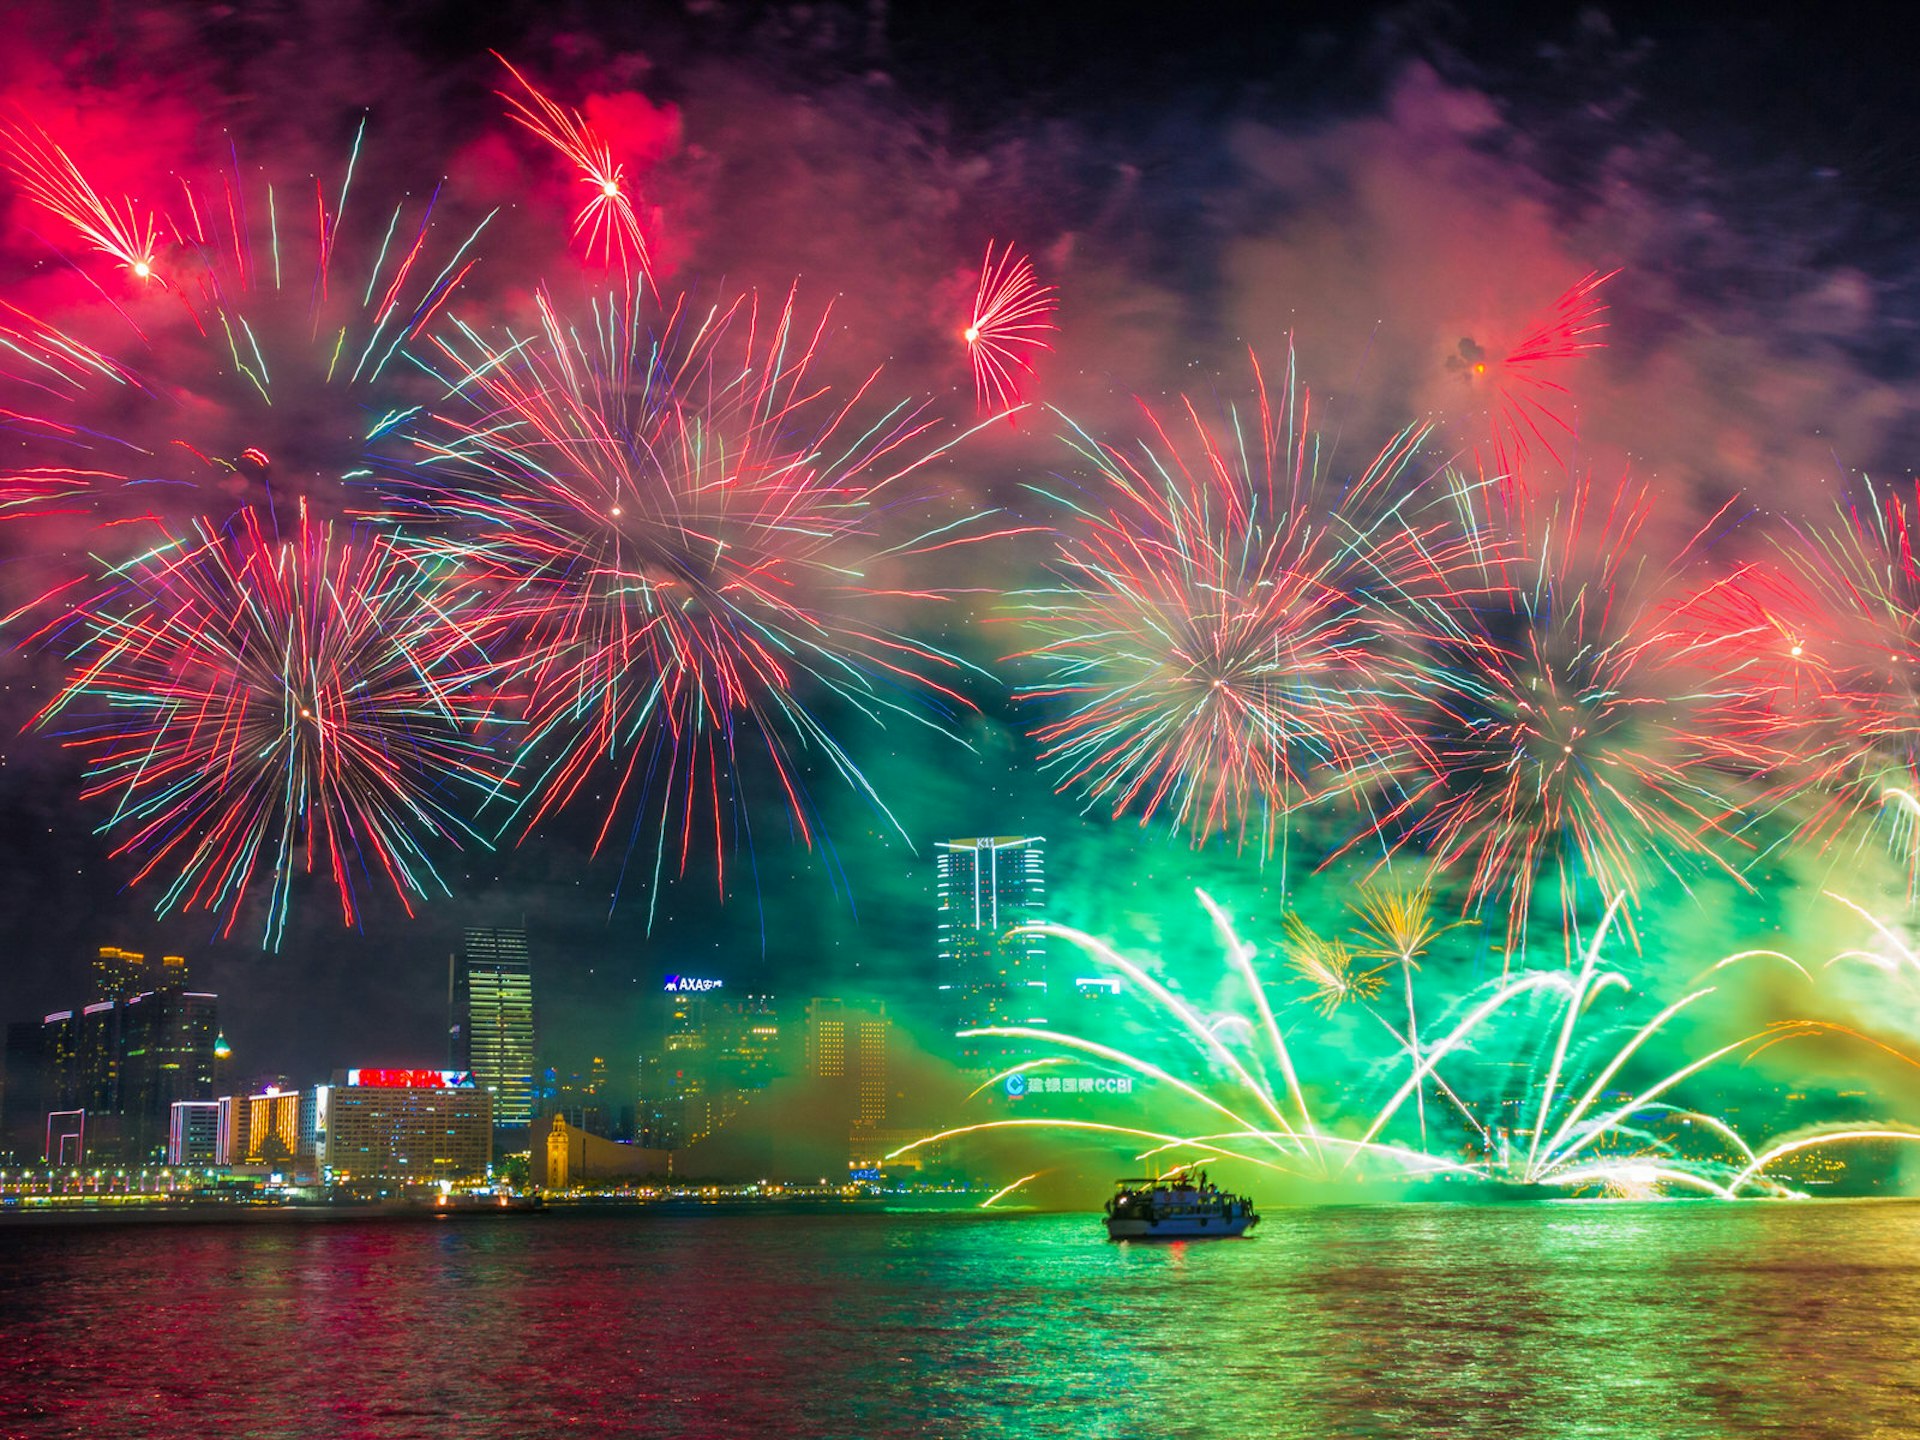 Red and green fireworks burst and reflect over the Hong Kong waterfront at night, with buildings lit up in the background and a boat in the foreground © e X p o s e / Shutterstock